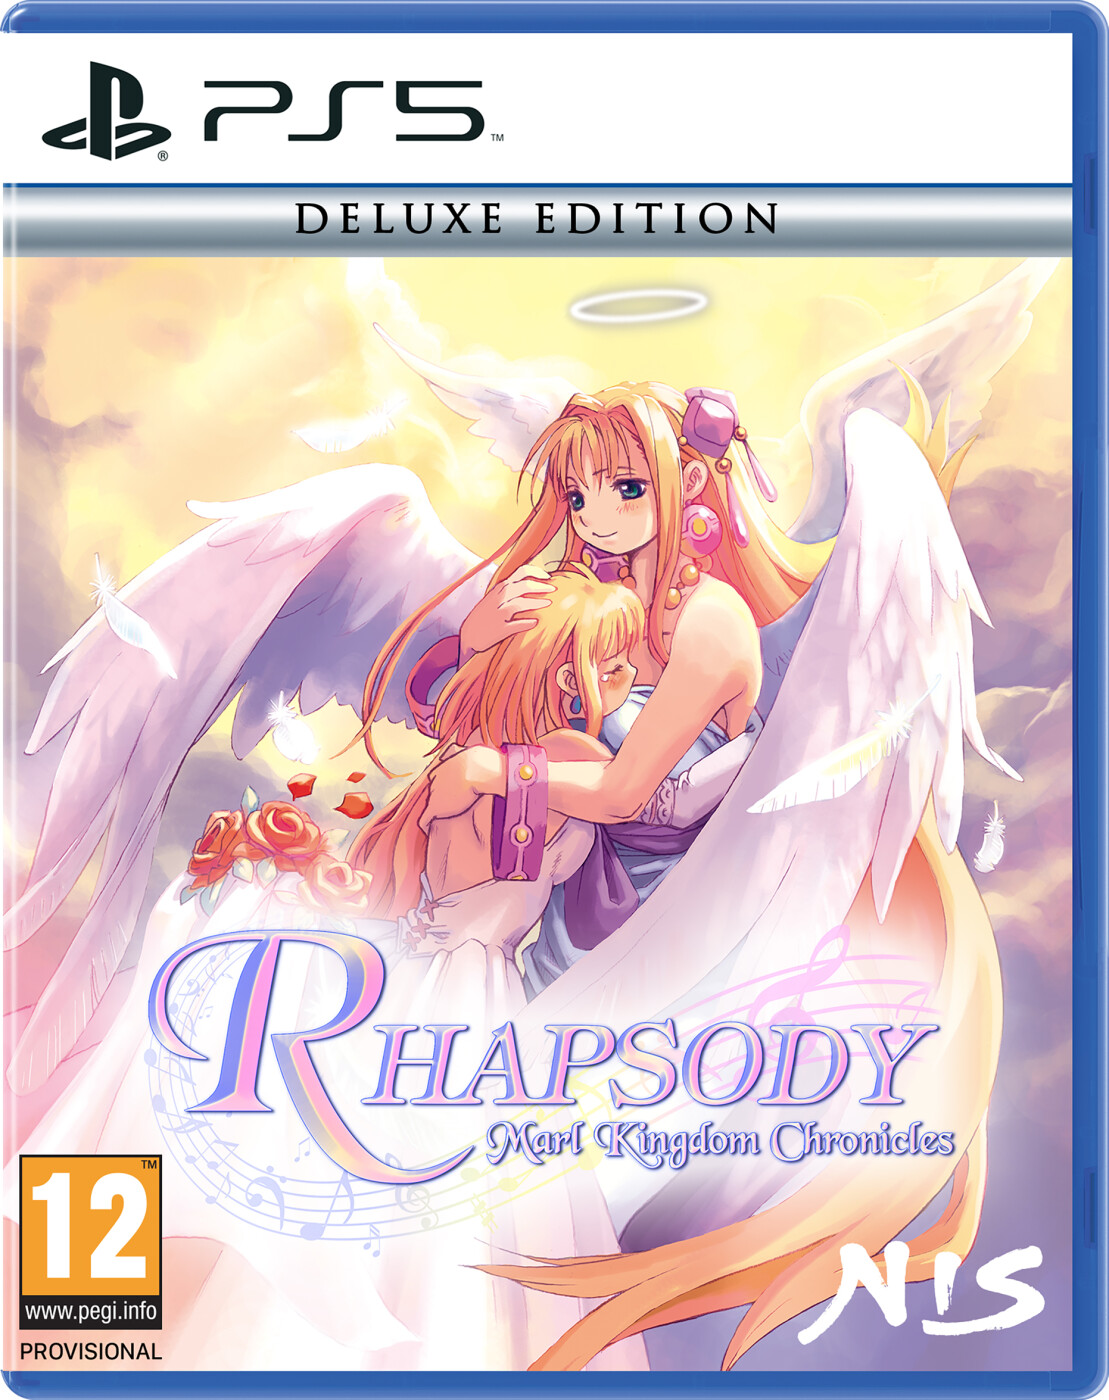 Se Rhapsody: Marl Kingdom Chronicles (deluxe Edition) - PS5 hos Gucca.dk